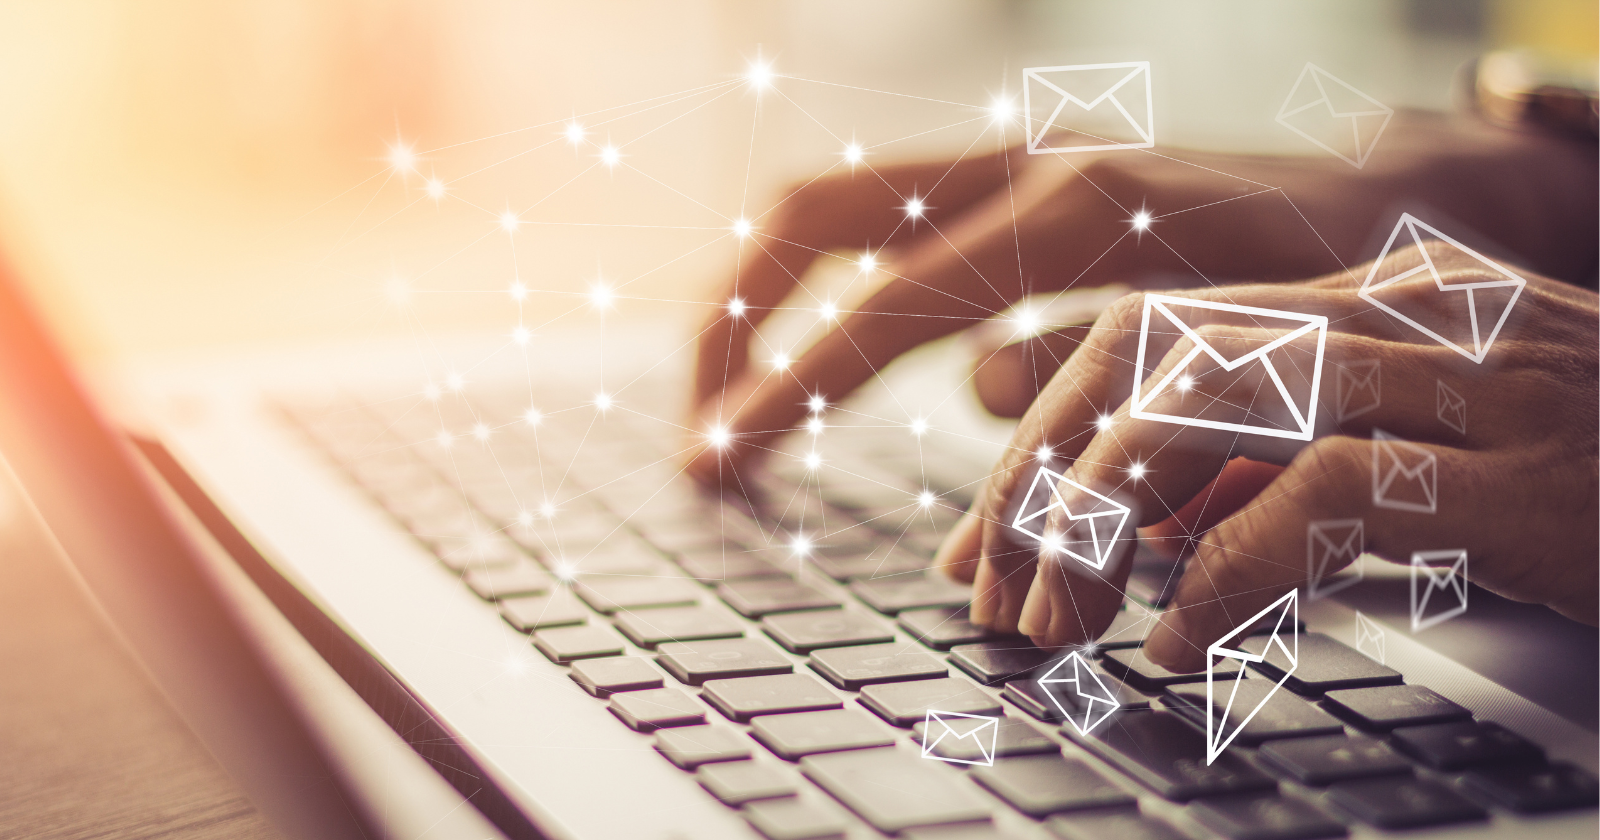 12 Powerful Email Marketing Tips You Need to Know